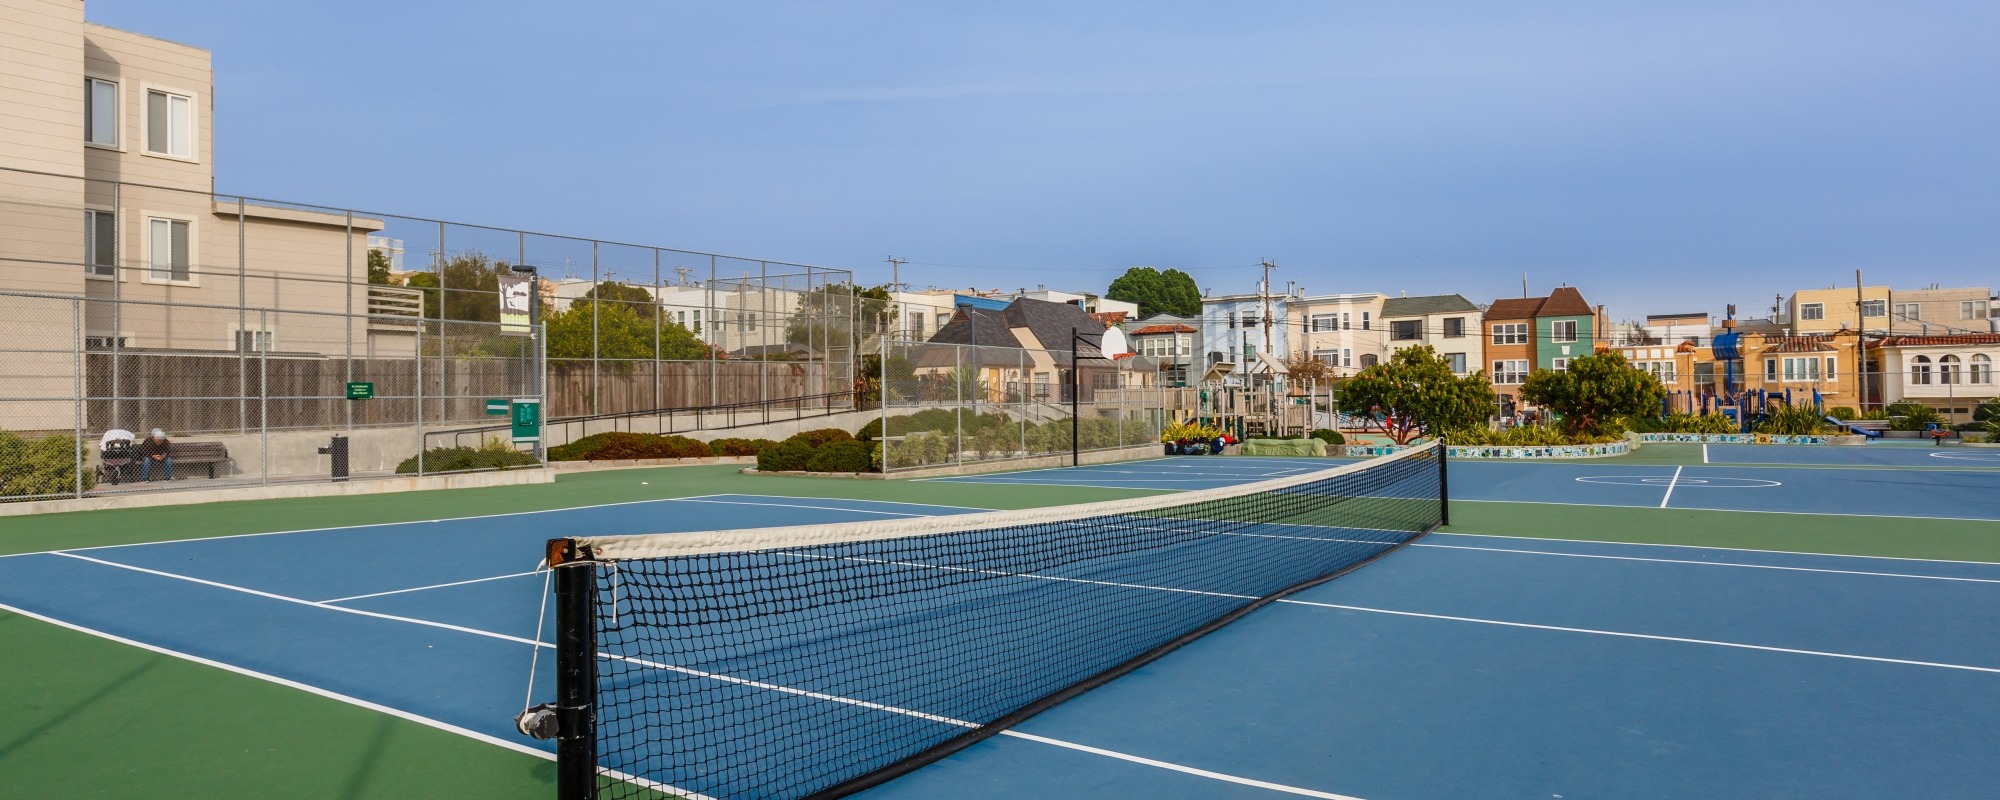 Cabrillo Playground and Clubhouse